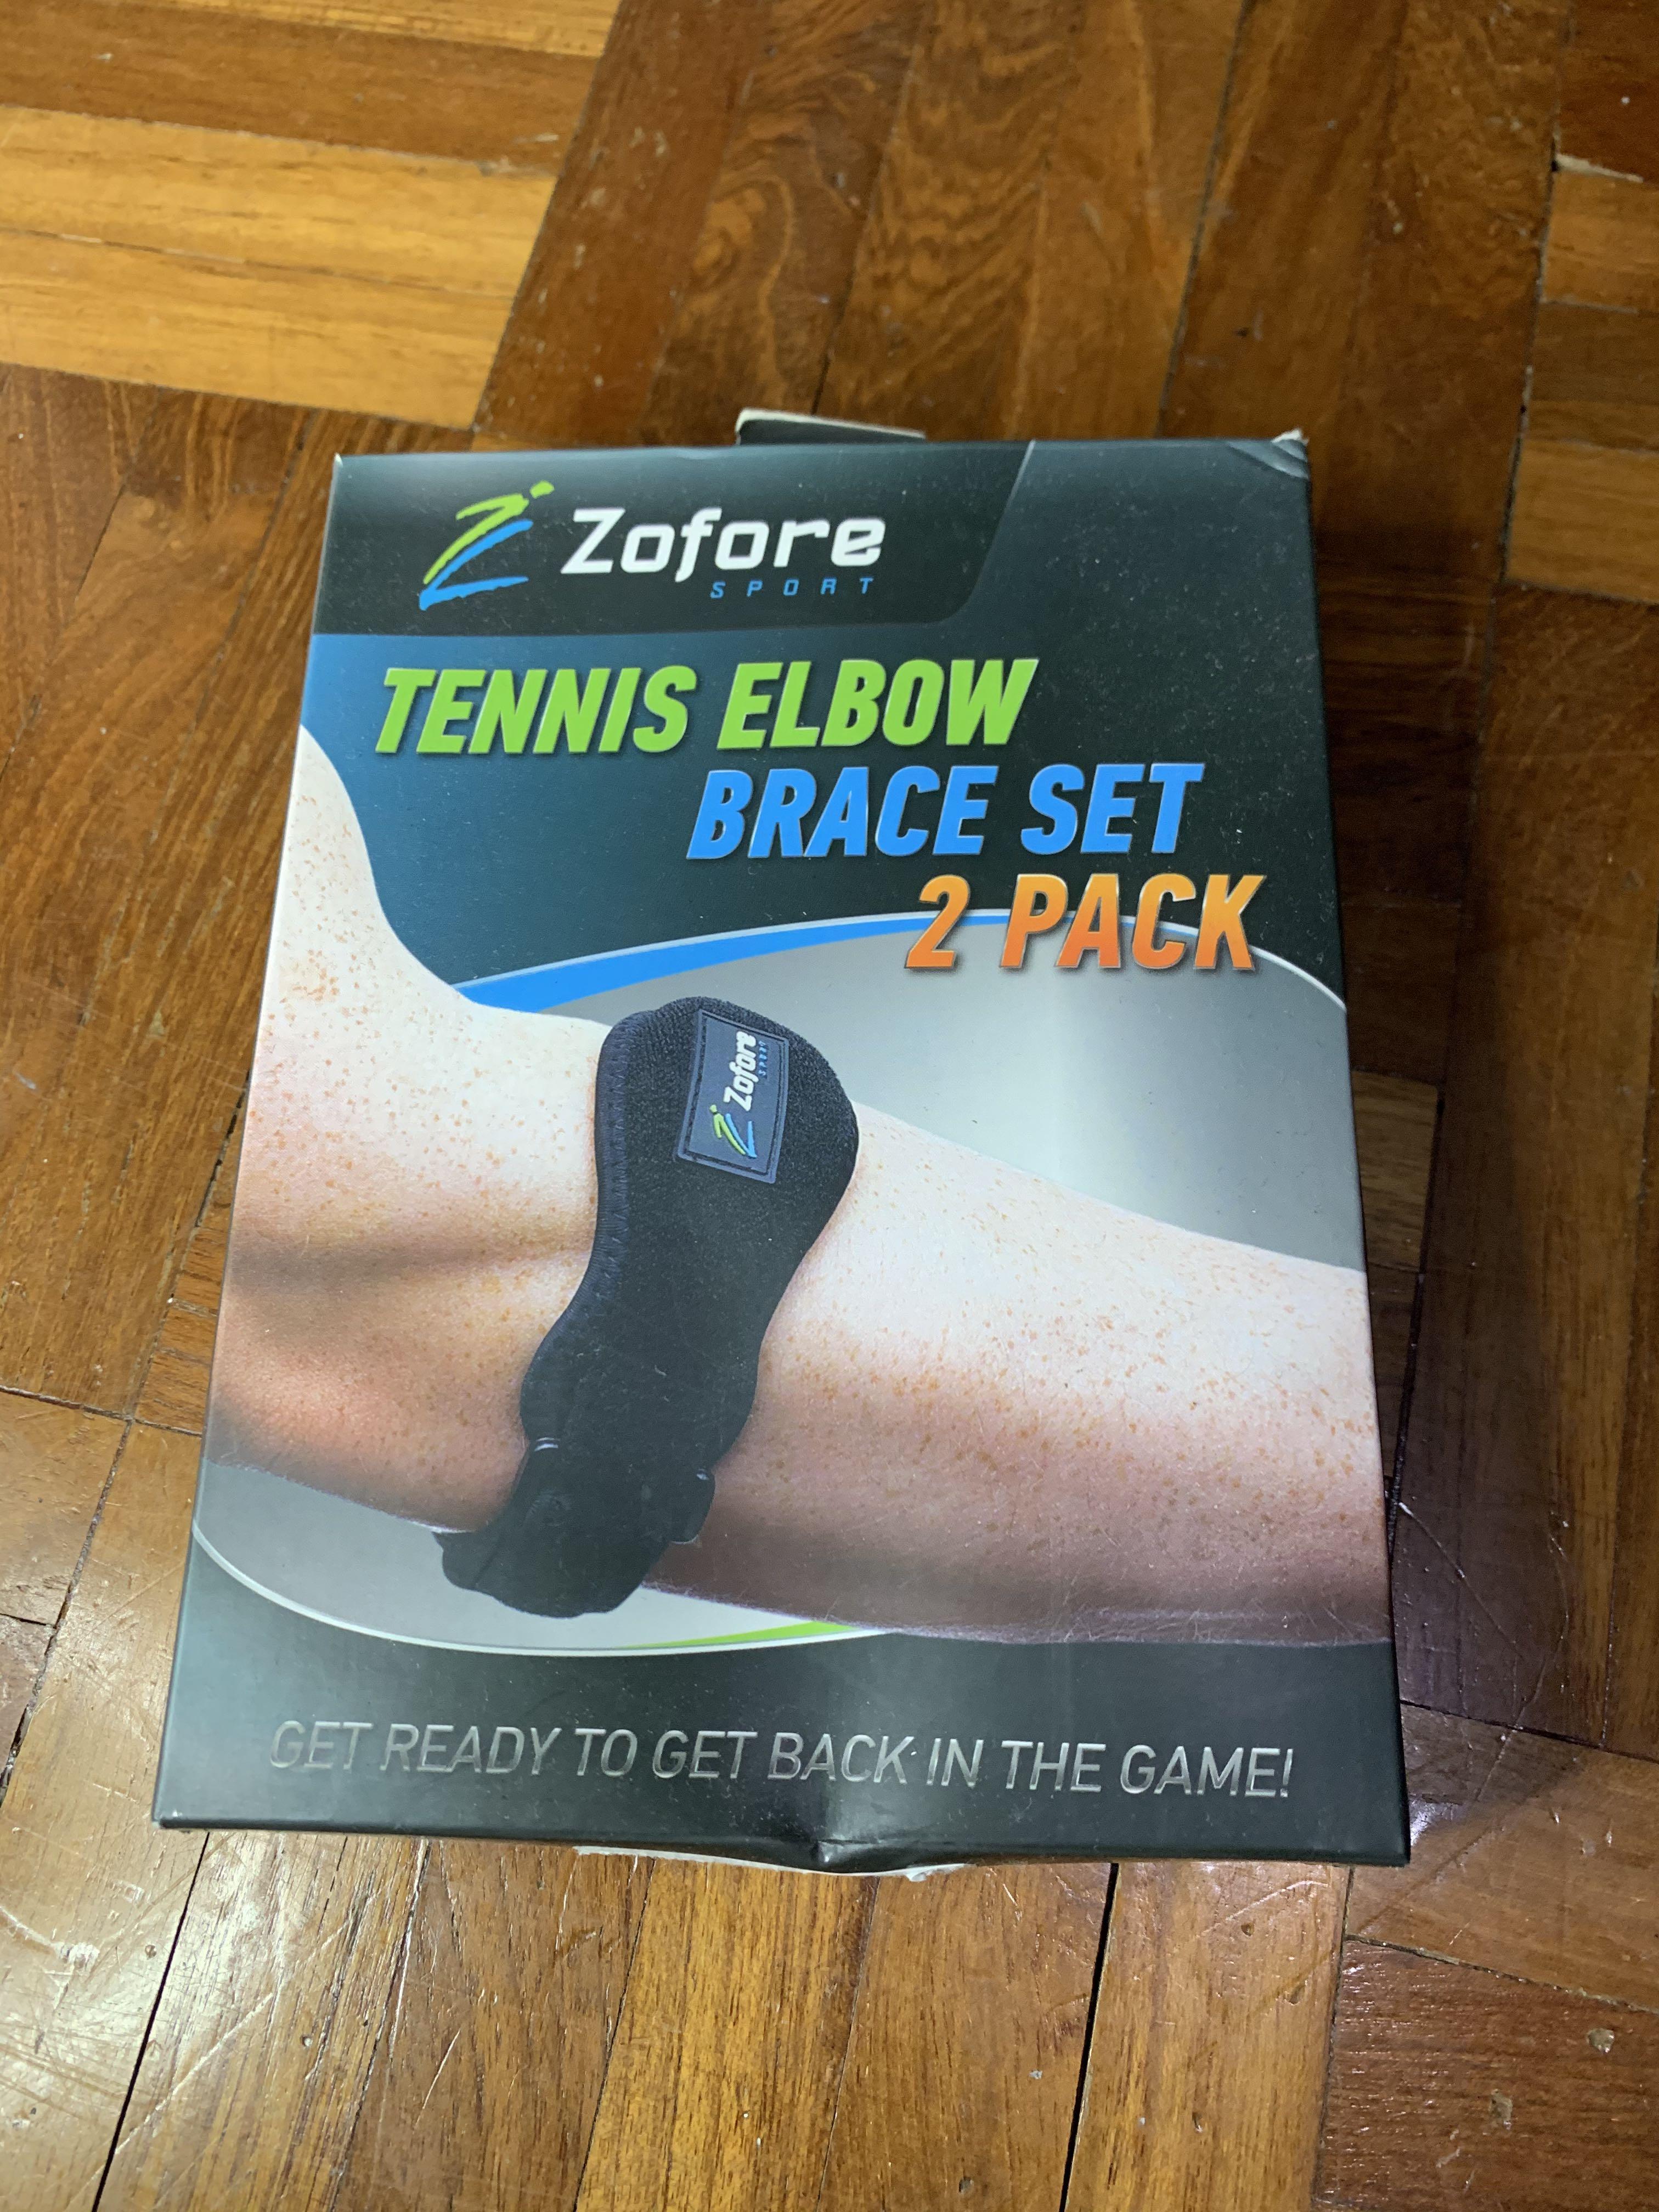 Tennis Elbow Brace With Compression Pad 2 Pack by Zofore Effective